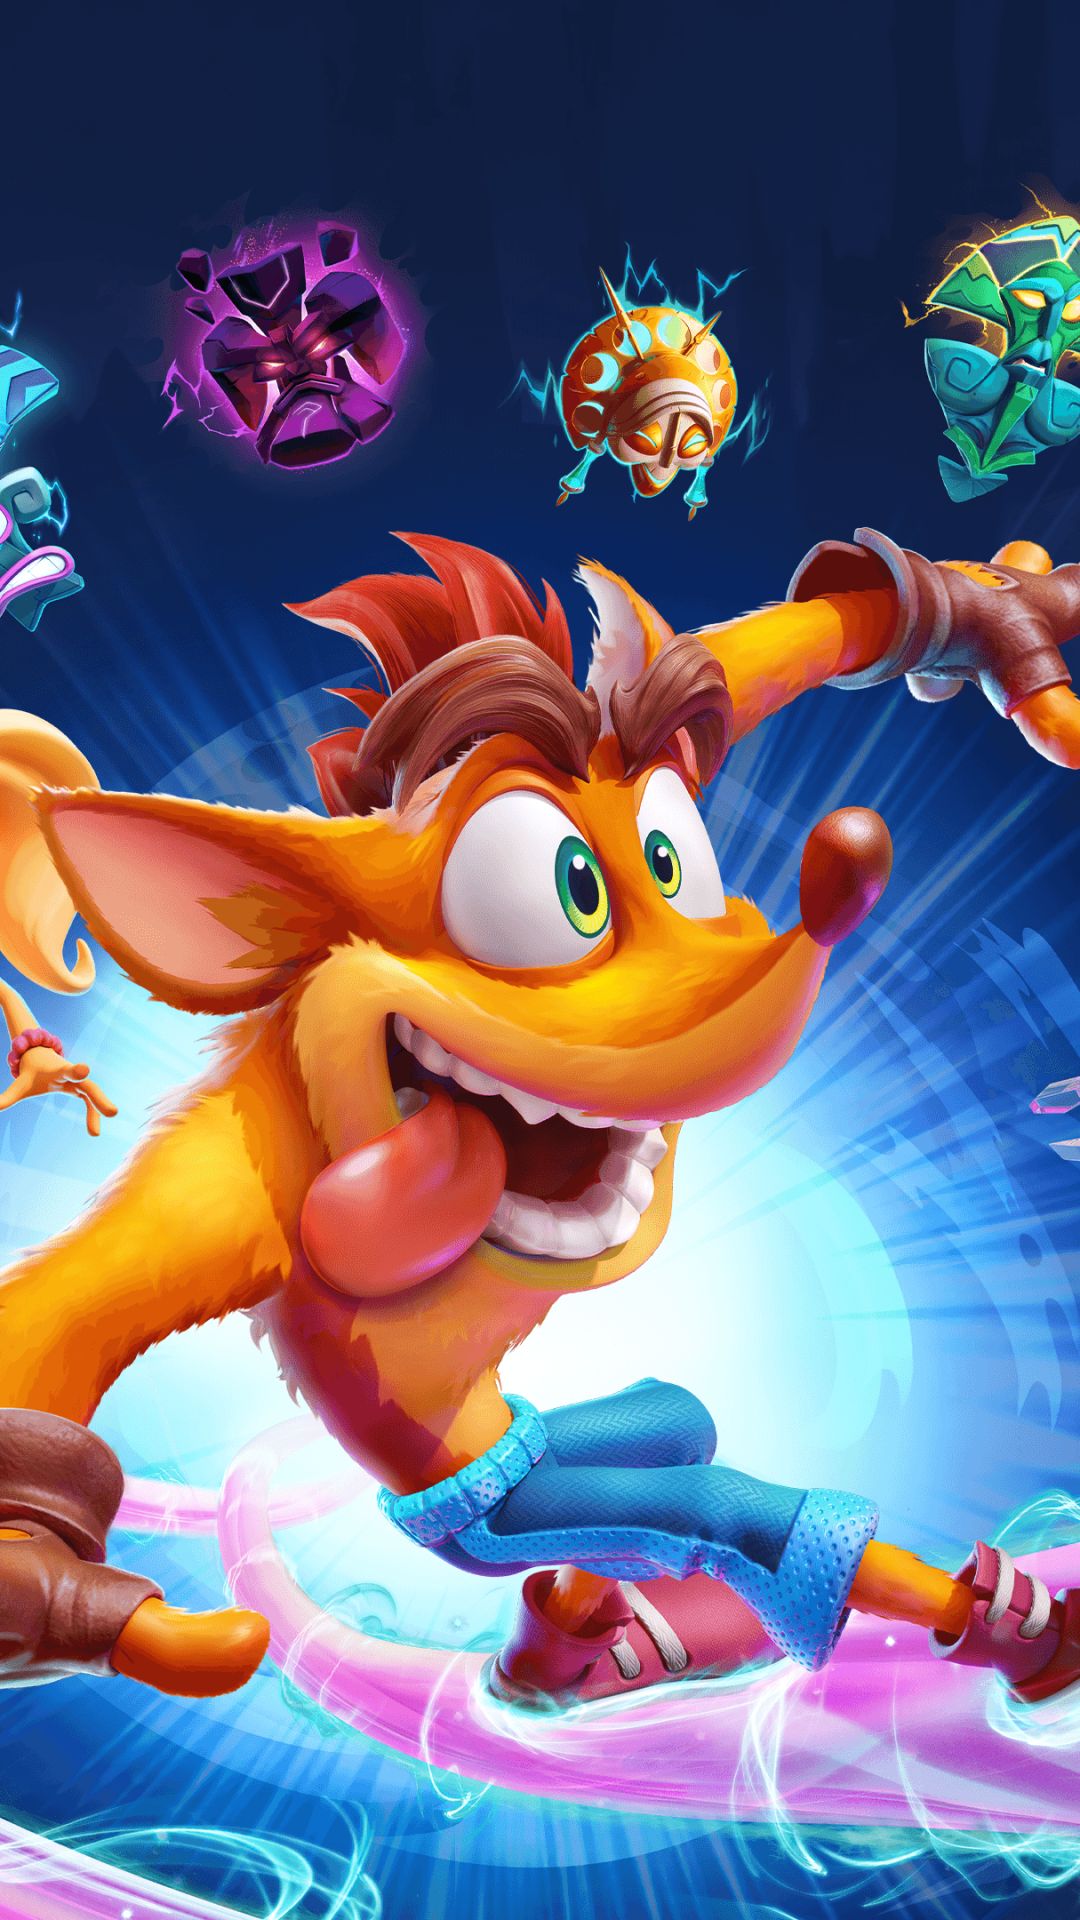 video game, crash bandicoot 4: it's about time, coco bandicoot, crash bandicoot